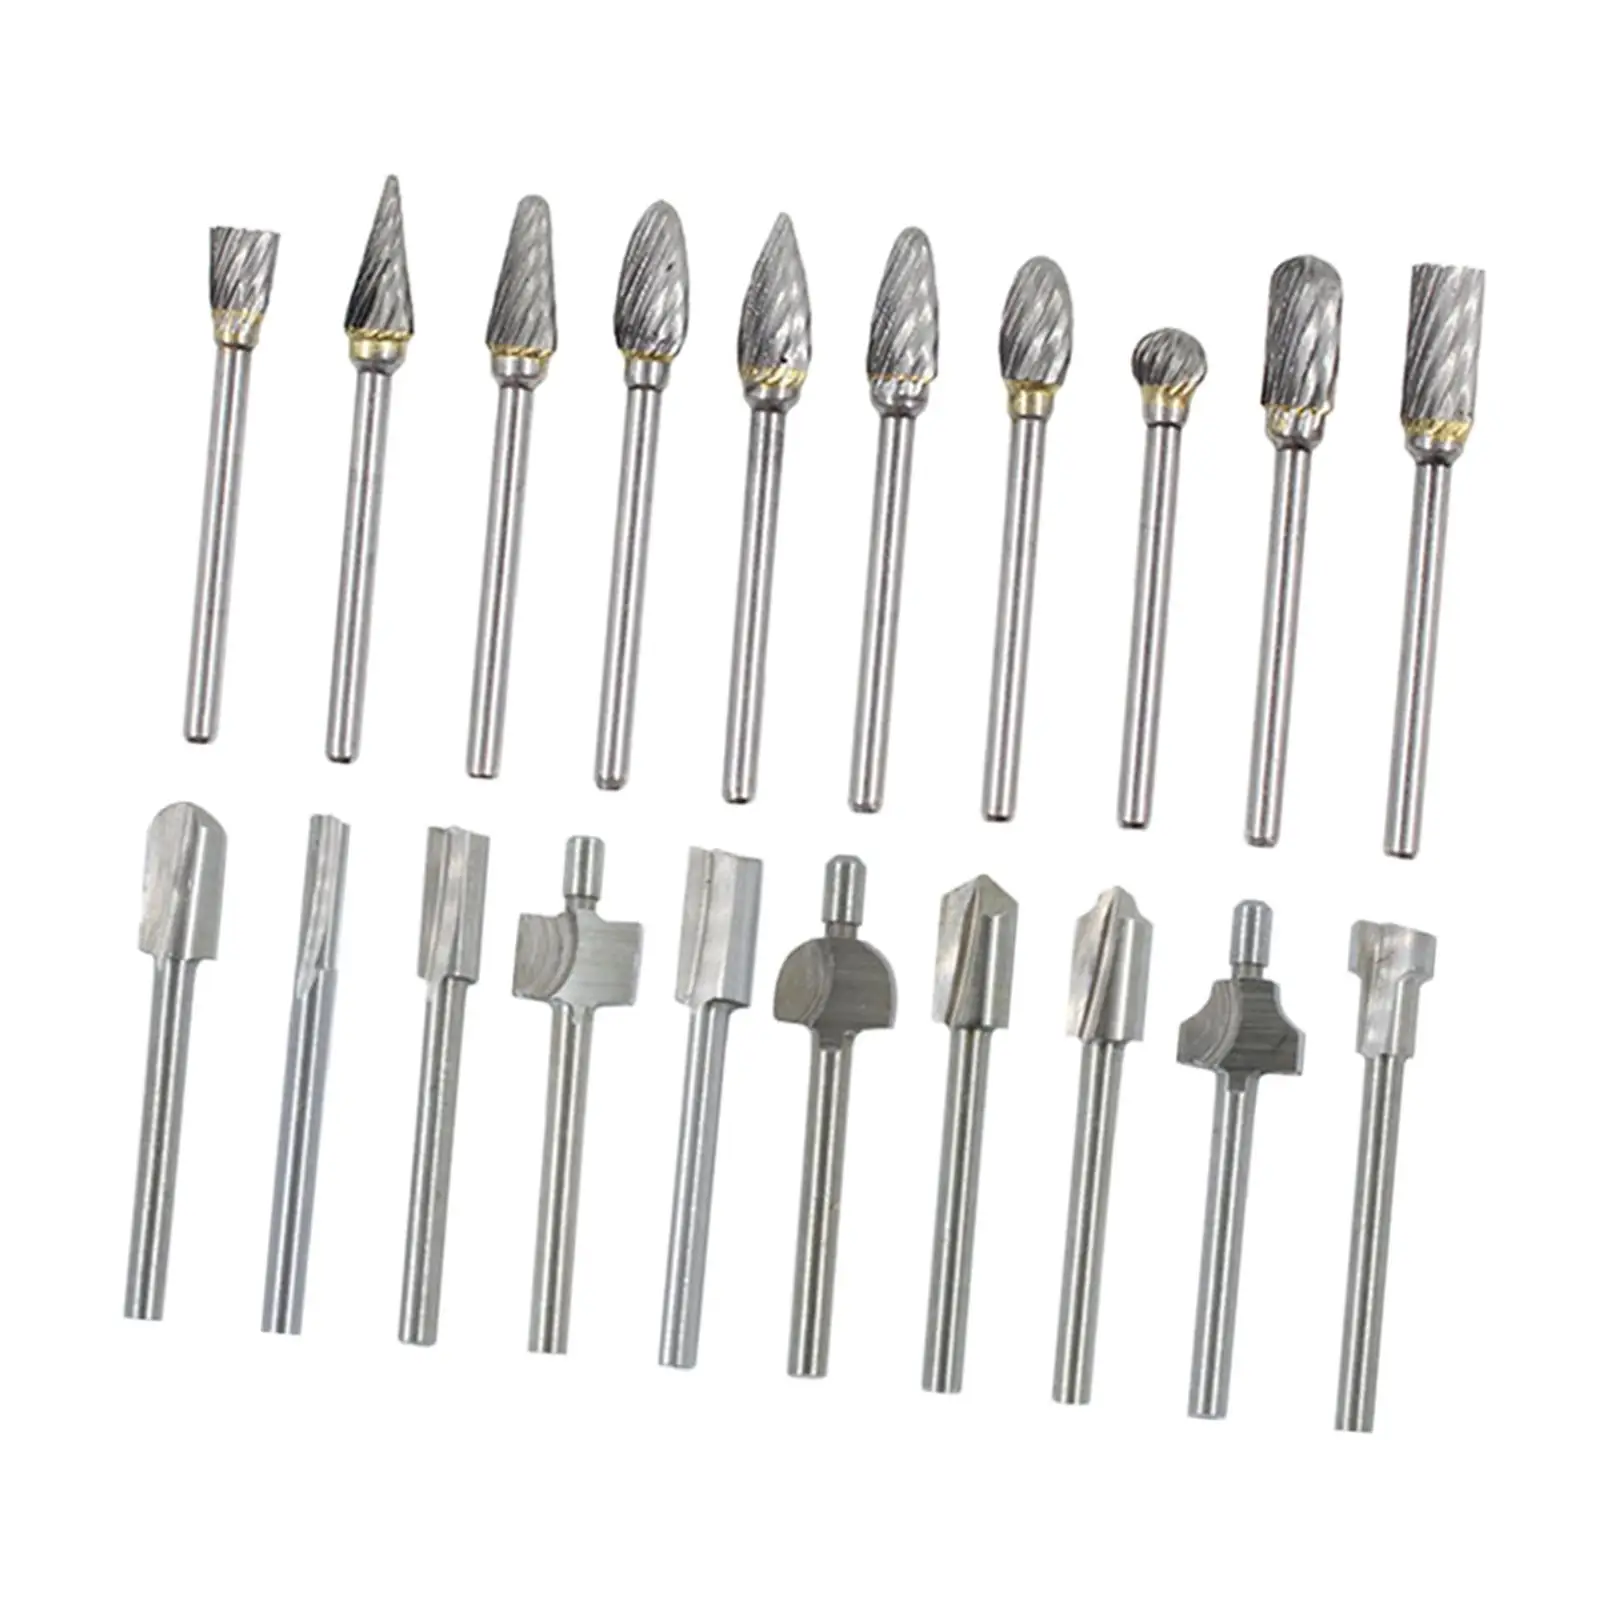 20 Pieces Rotary Drill Set, Wood Rasp files for Carving Drilling Jewelry